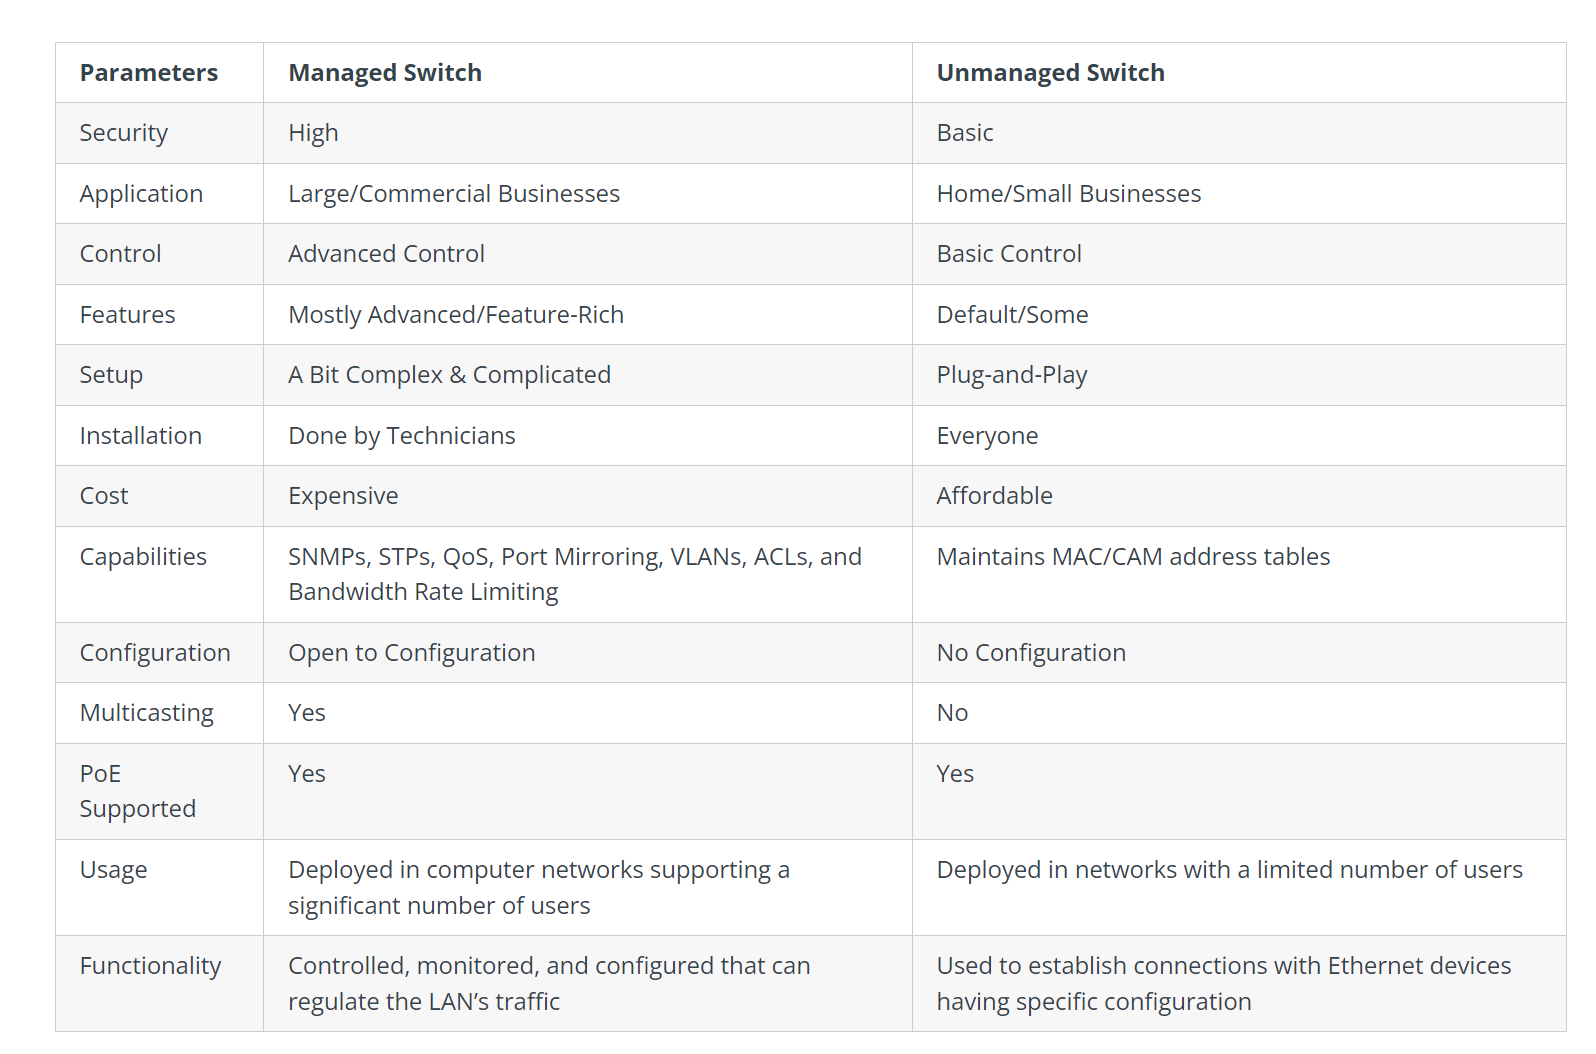 Managed Vs Unmanaged Switch